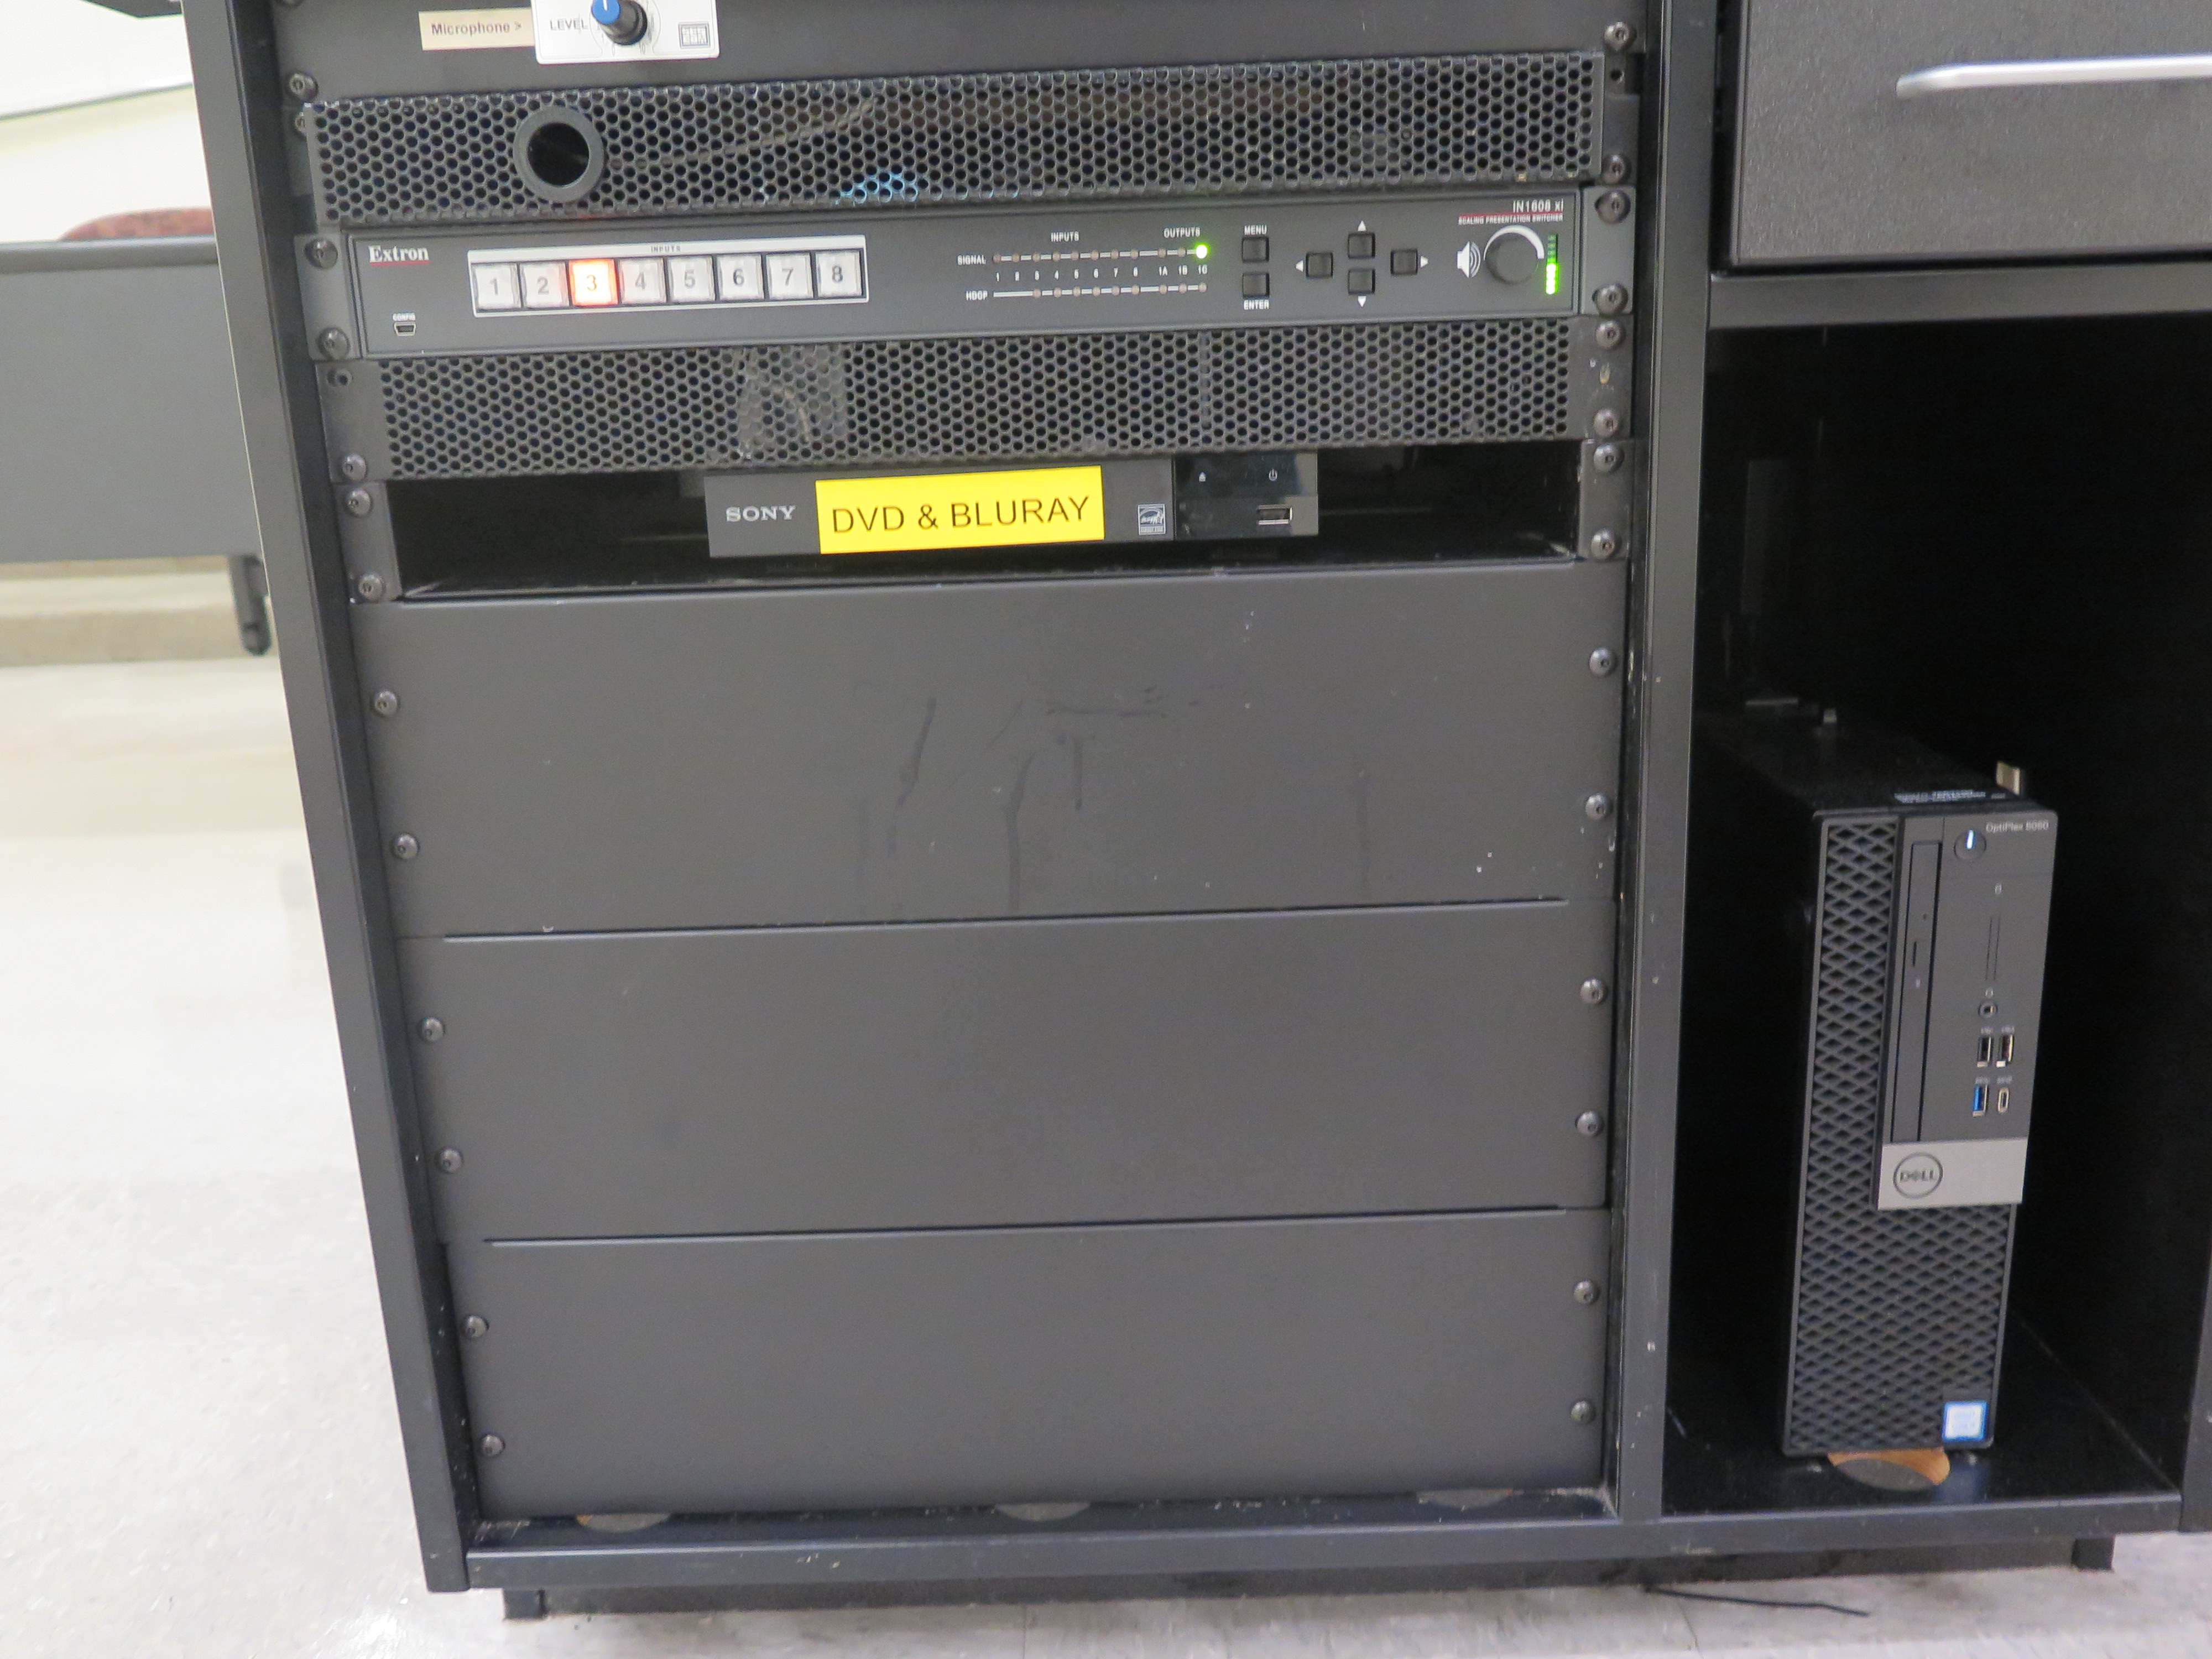 Front of equipment rack showing AV switcher, below that is Blue-Ray/DVD player, to the right is the Dell computer CPU.